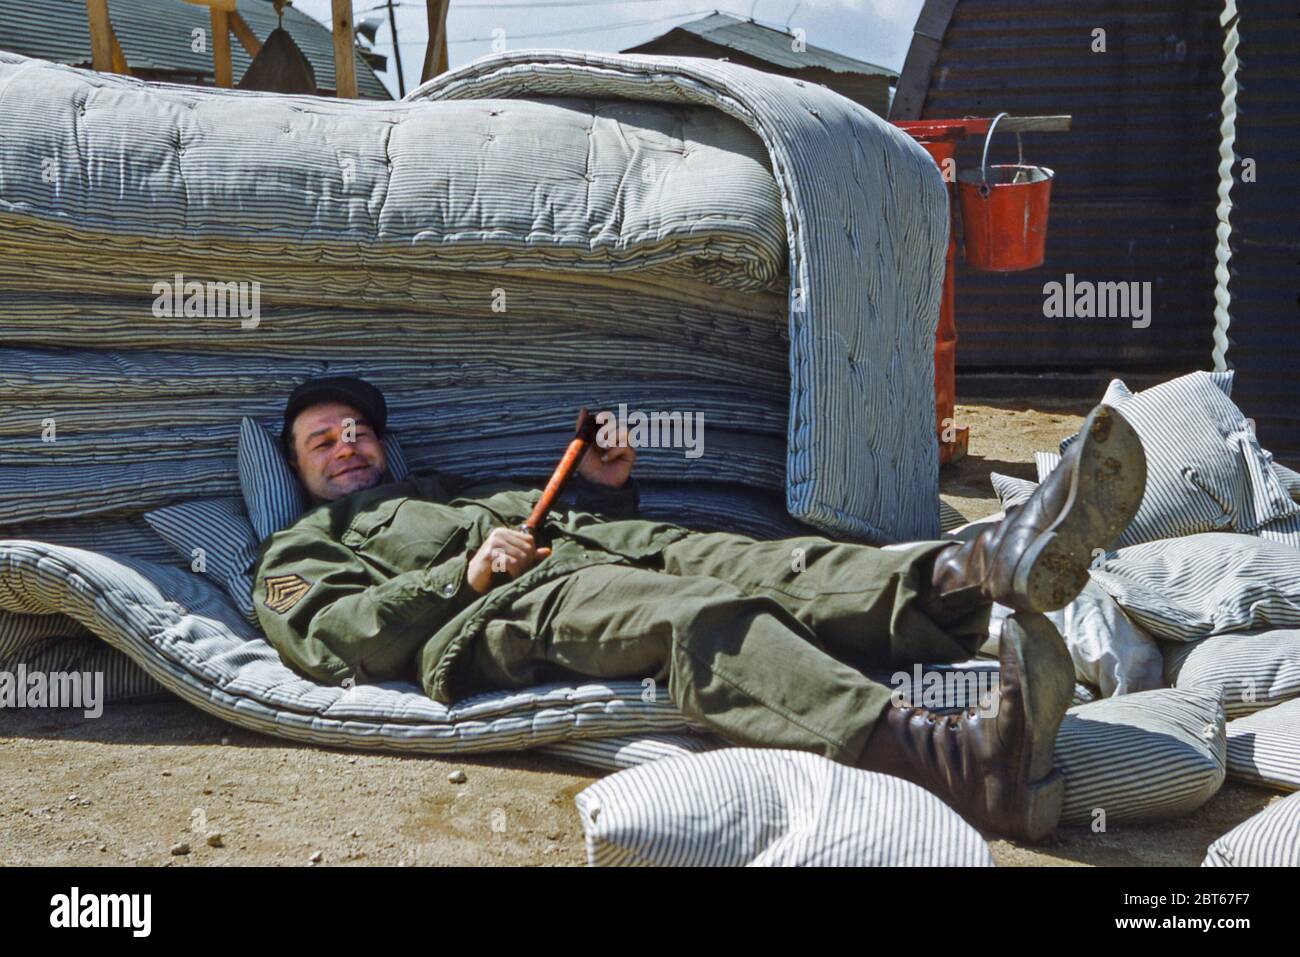 Enjoying off-duty barrack life for the US Army's 40th Infantry, Division Replacement Company in the Japan 1955, shortly after the Korean War was over. This smiling sergeant lies relaxed on a pile of mattresses and holds a baton (stick or truncheon). The 40th Infantry Division ('Sunshine Division') is part of the US Army.  It saw active service in the Korean War (1950–53), participating in the battles of Sandbag Castle and Heartbreak Ridge. The division remained in Korea until May 1954. In 1953 their HQ moved to Tokyo, then to Yokohama and finally in October to Camp Zama, southwest of Tokyo. Stock Photo